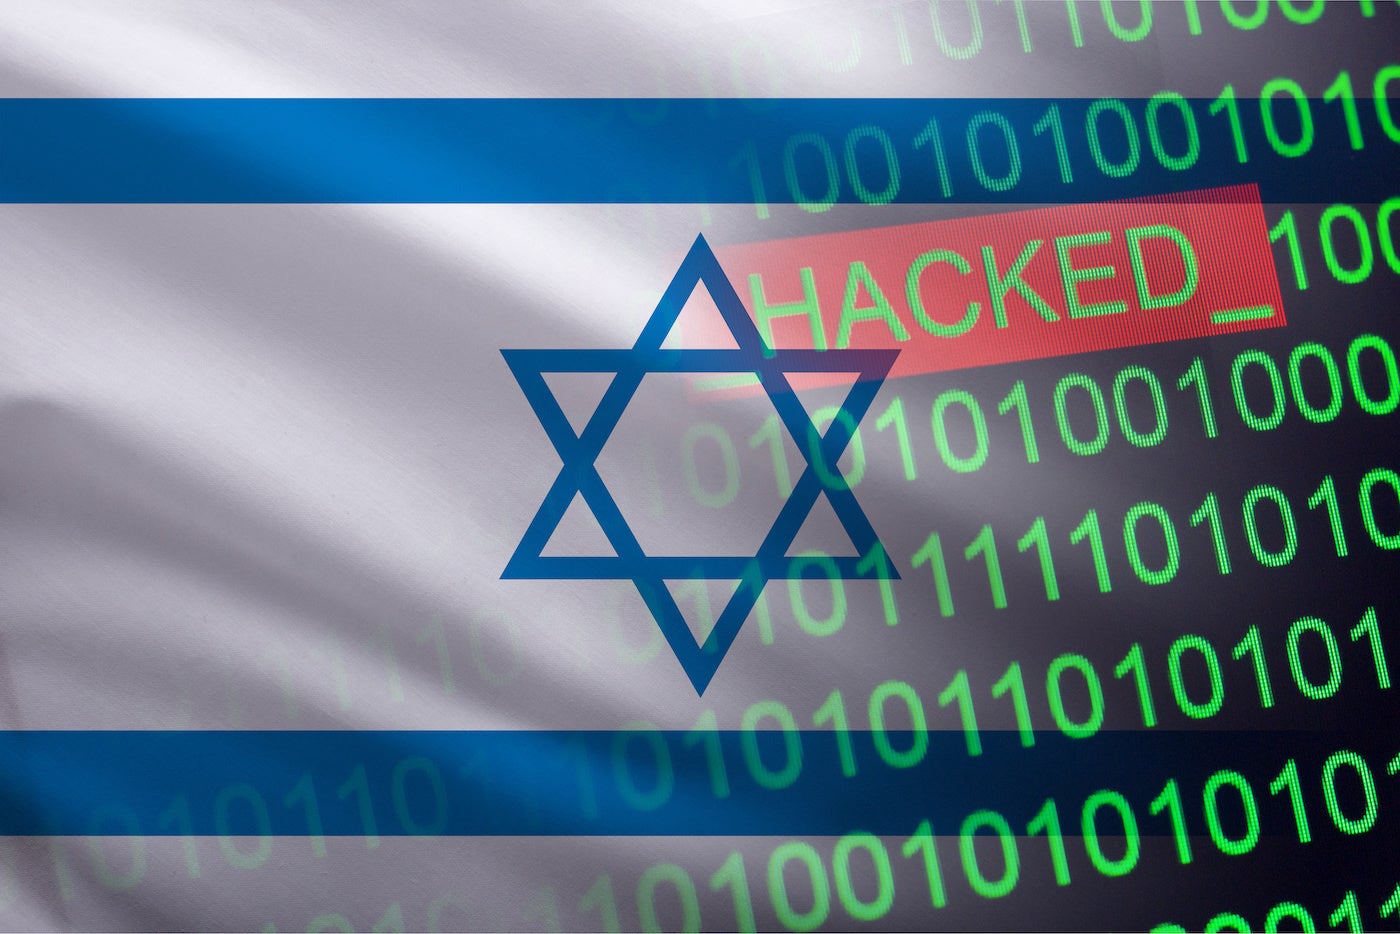 Israel flag with cybersecurity hacked copy in stock image.